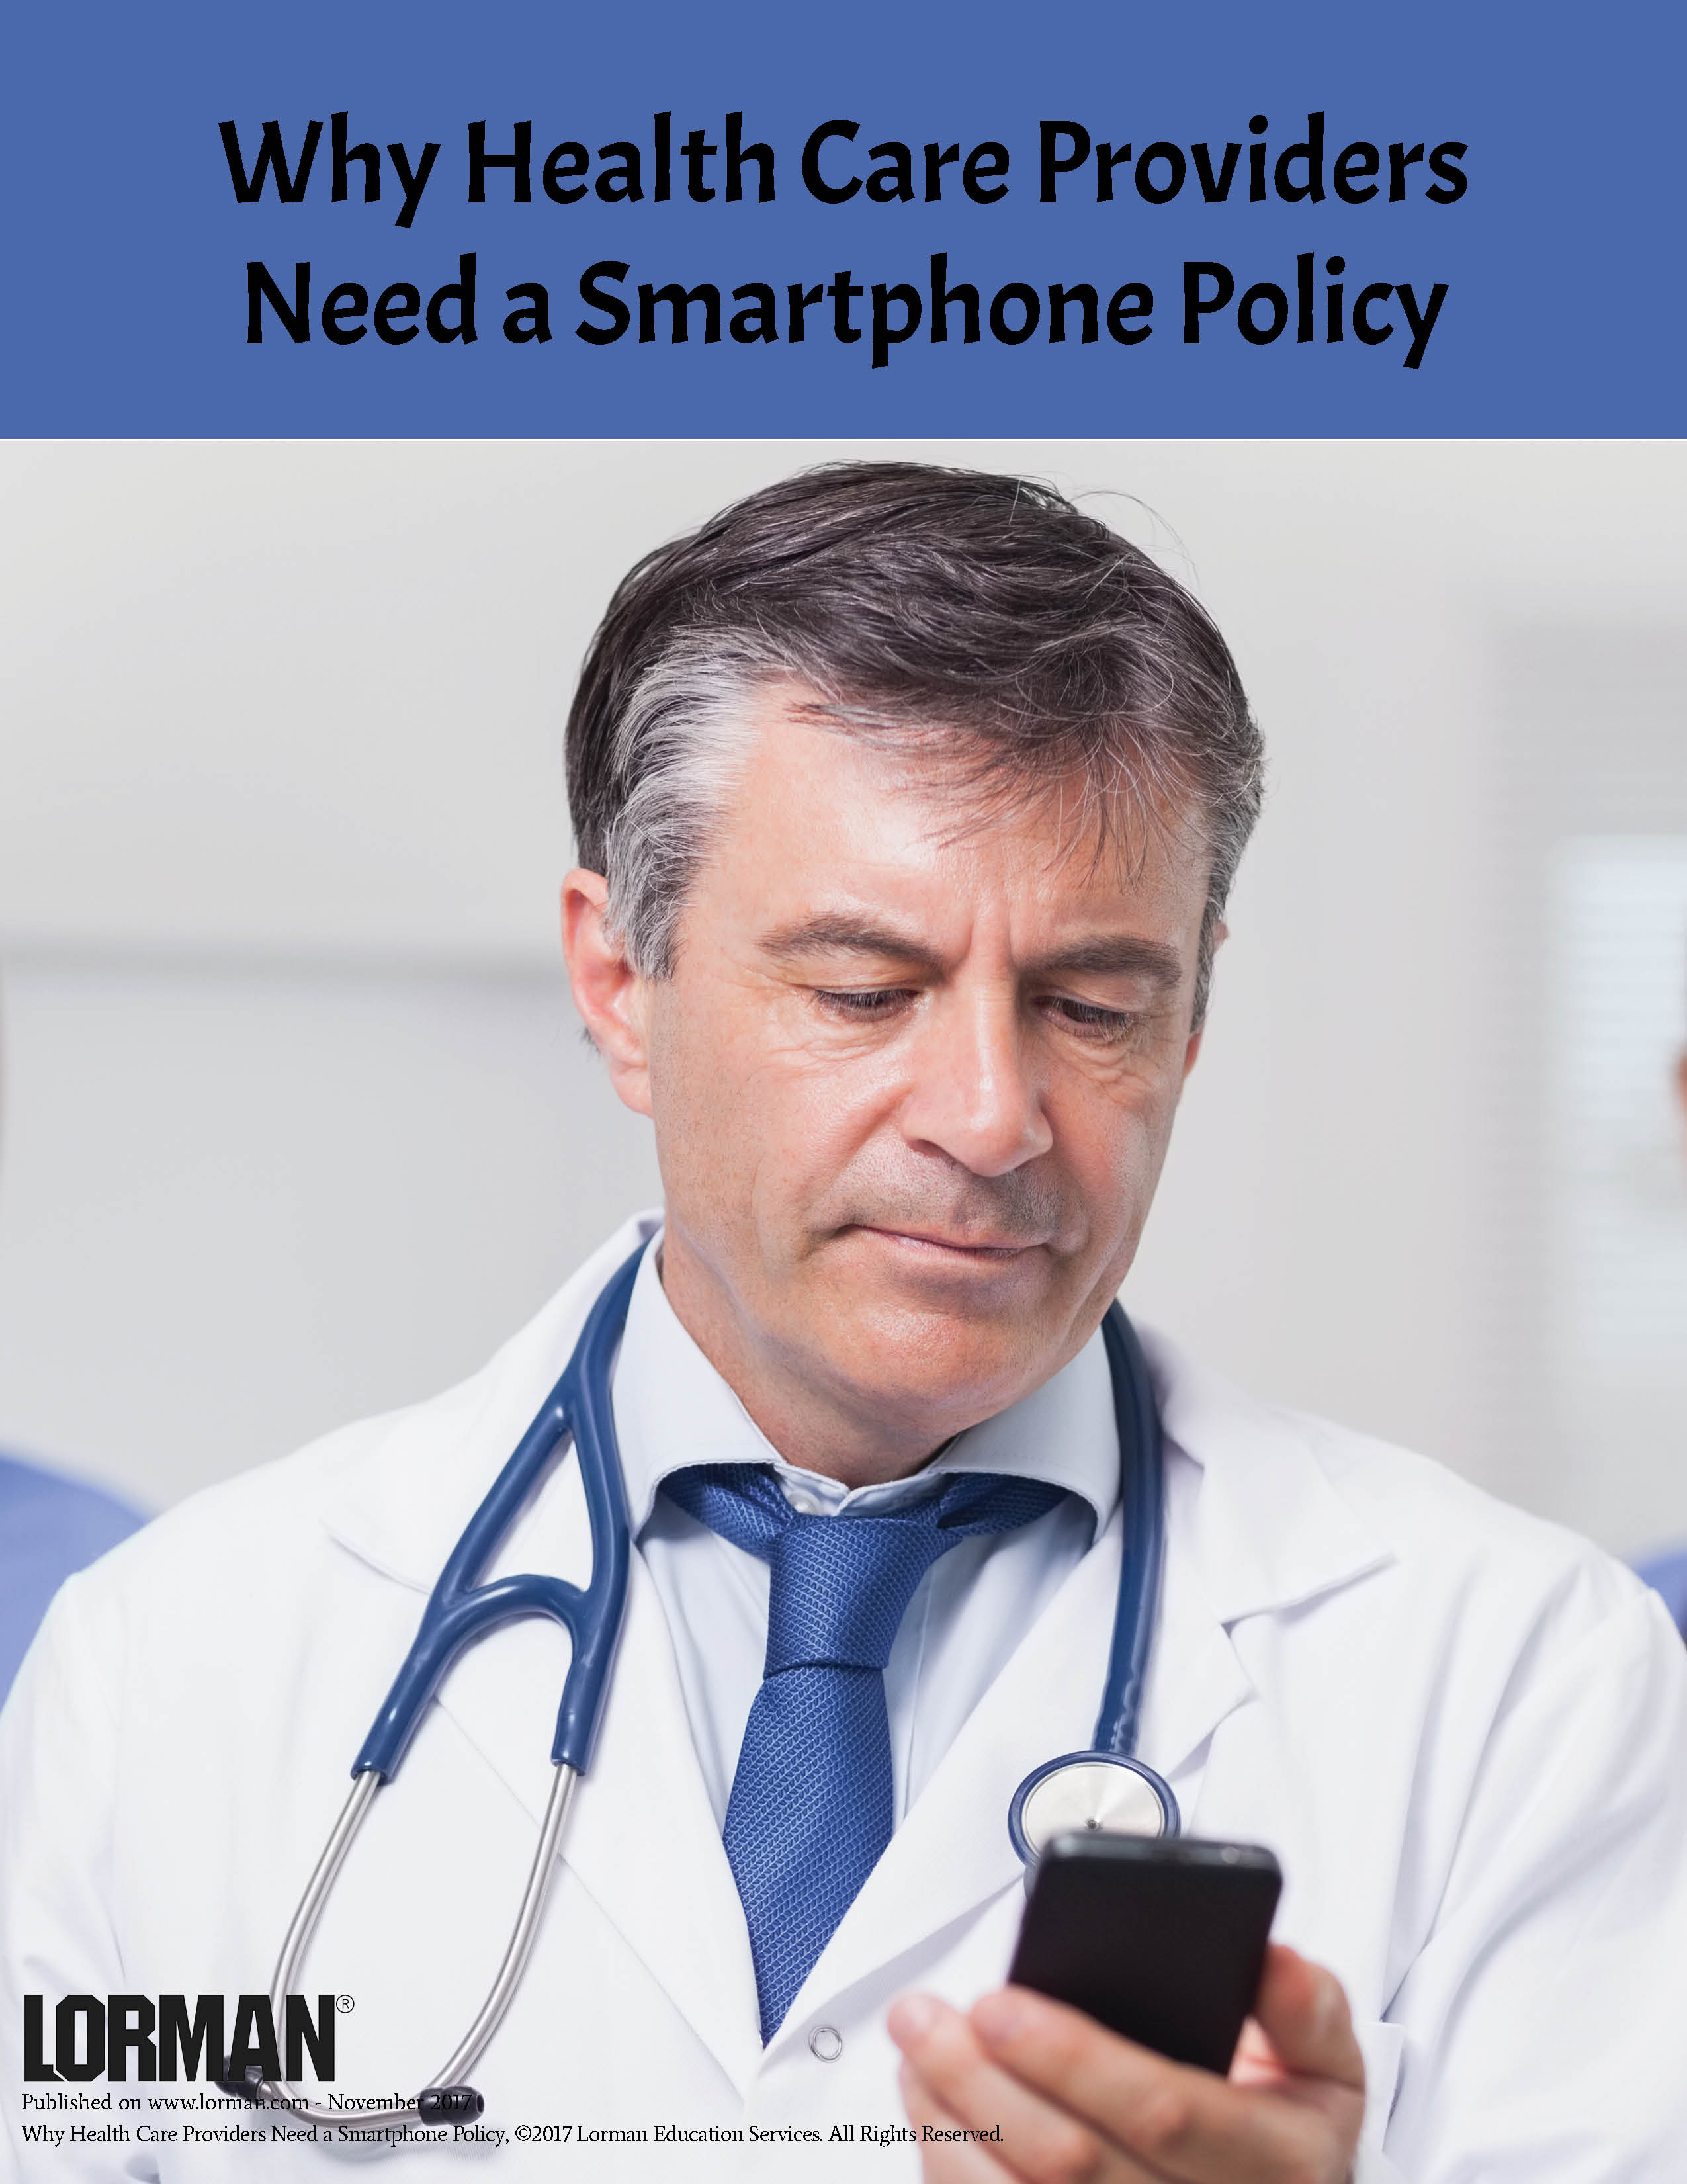 Why Healthcare Providers Need a Smartphone Policy